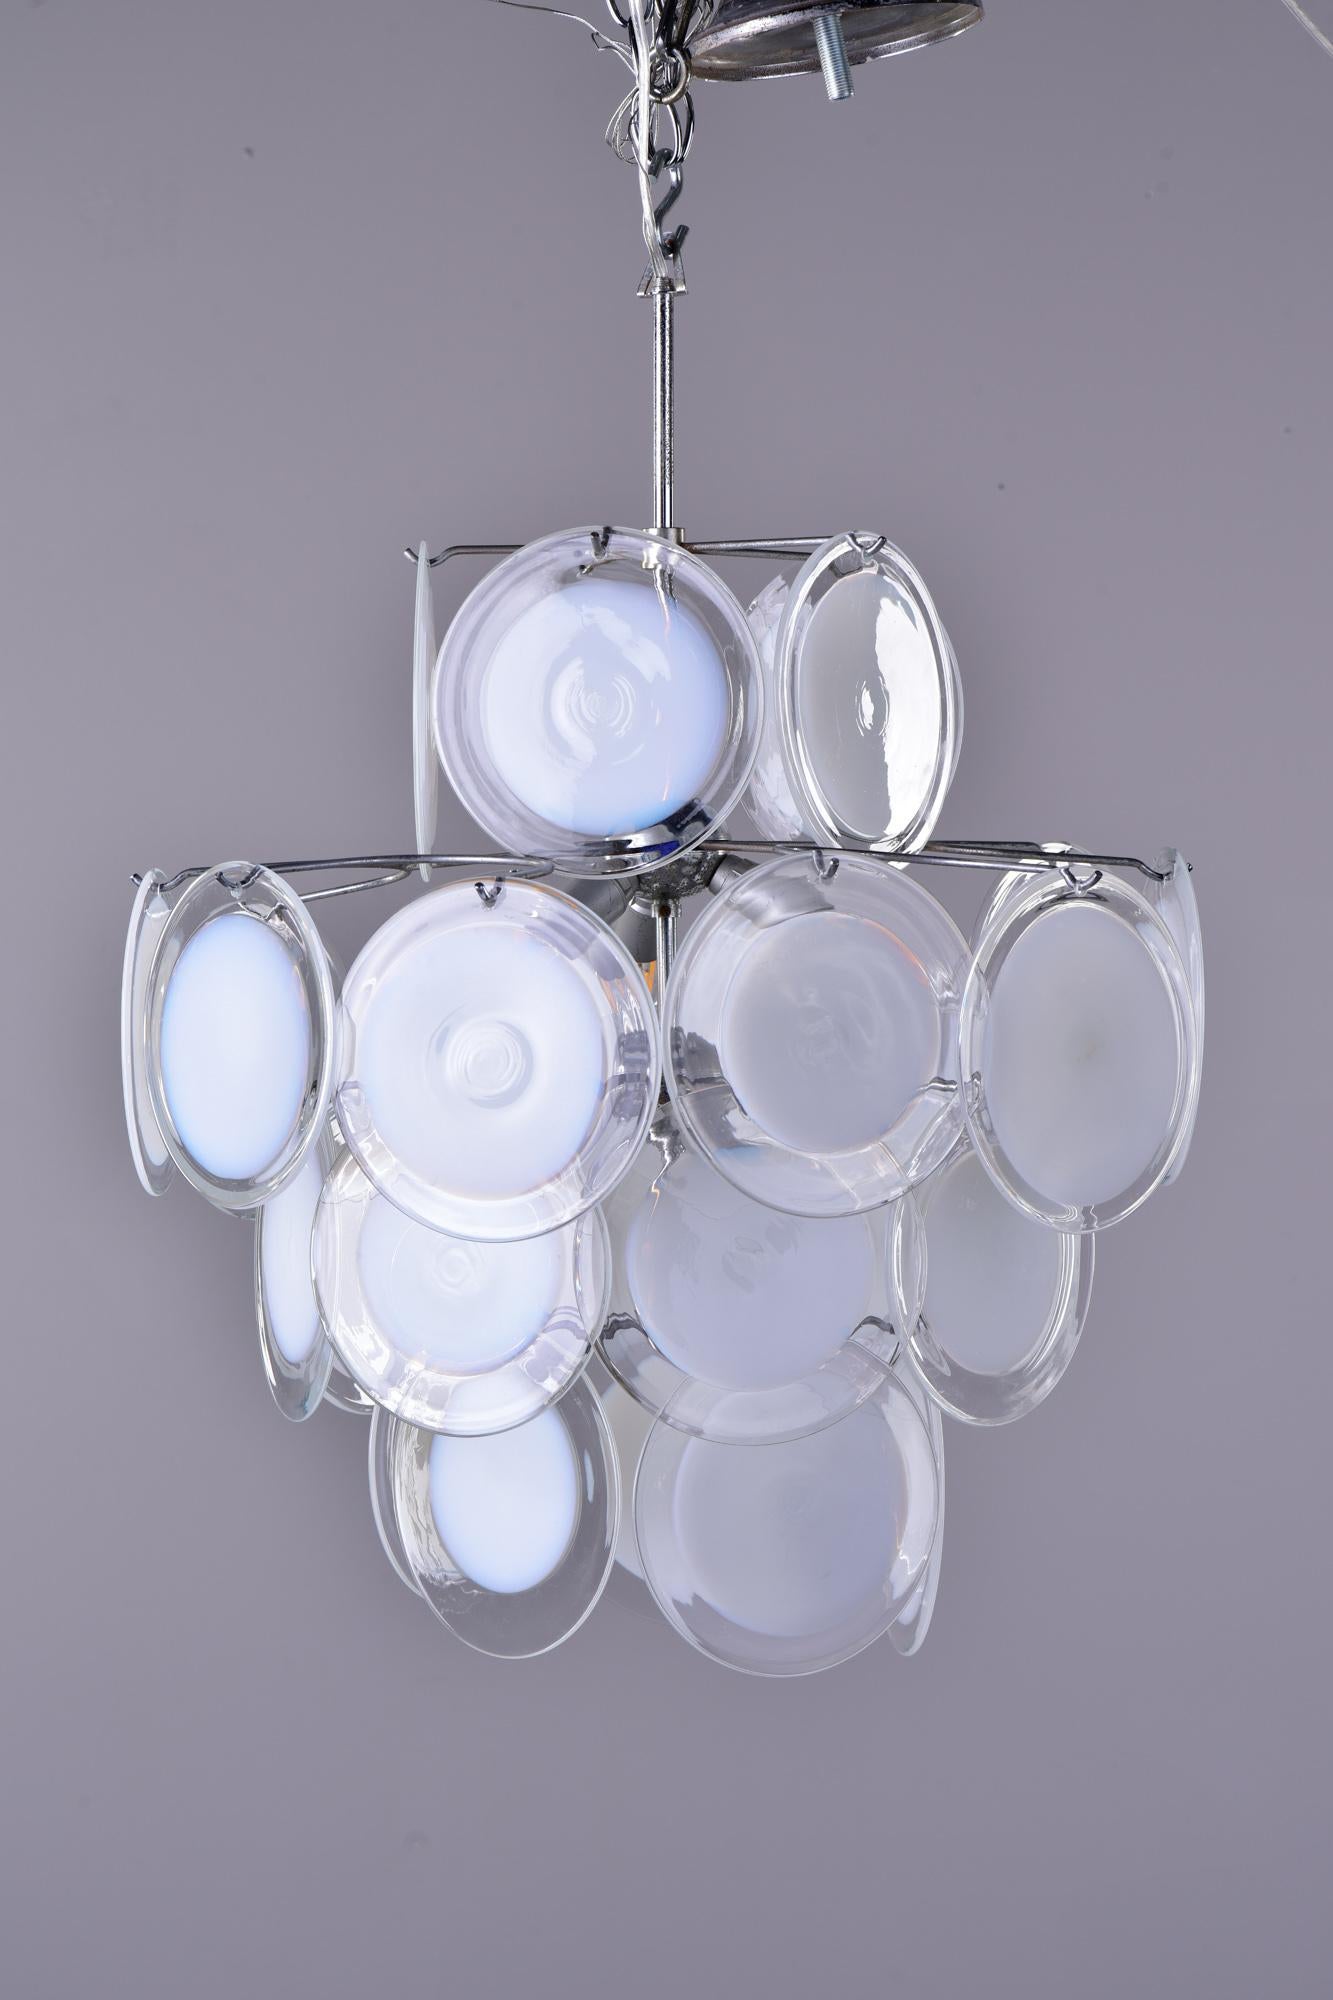 Circa 1960s Vistosi style murano glass fixture with four tiered metal frame hung with round art glass disks that are clear at edges and more opaque white at the center. No maker's mark. Six candelabra sized sockets. New wiring for US electrical